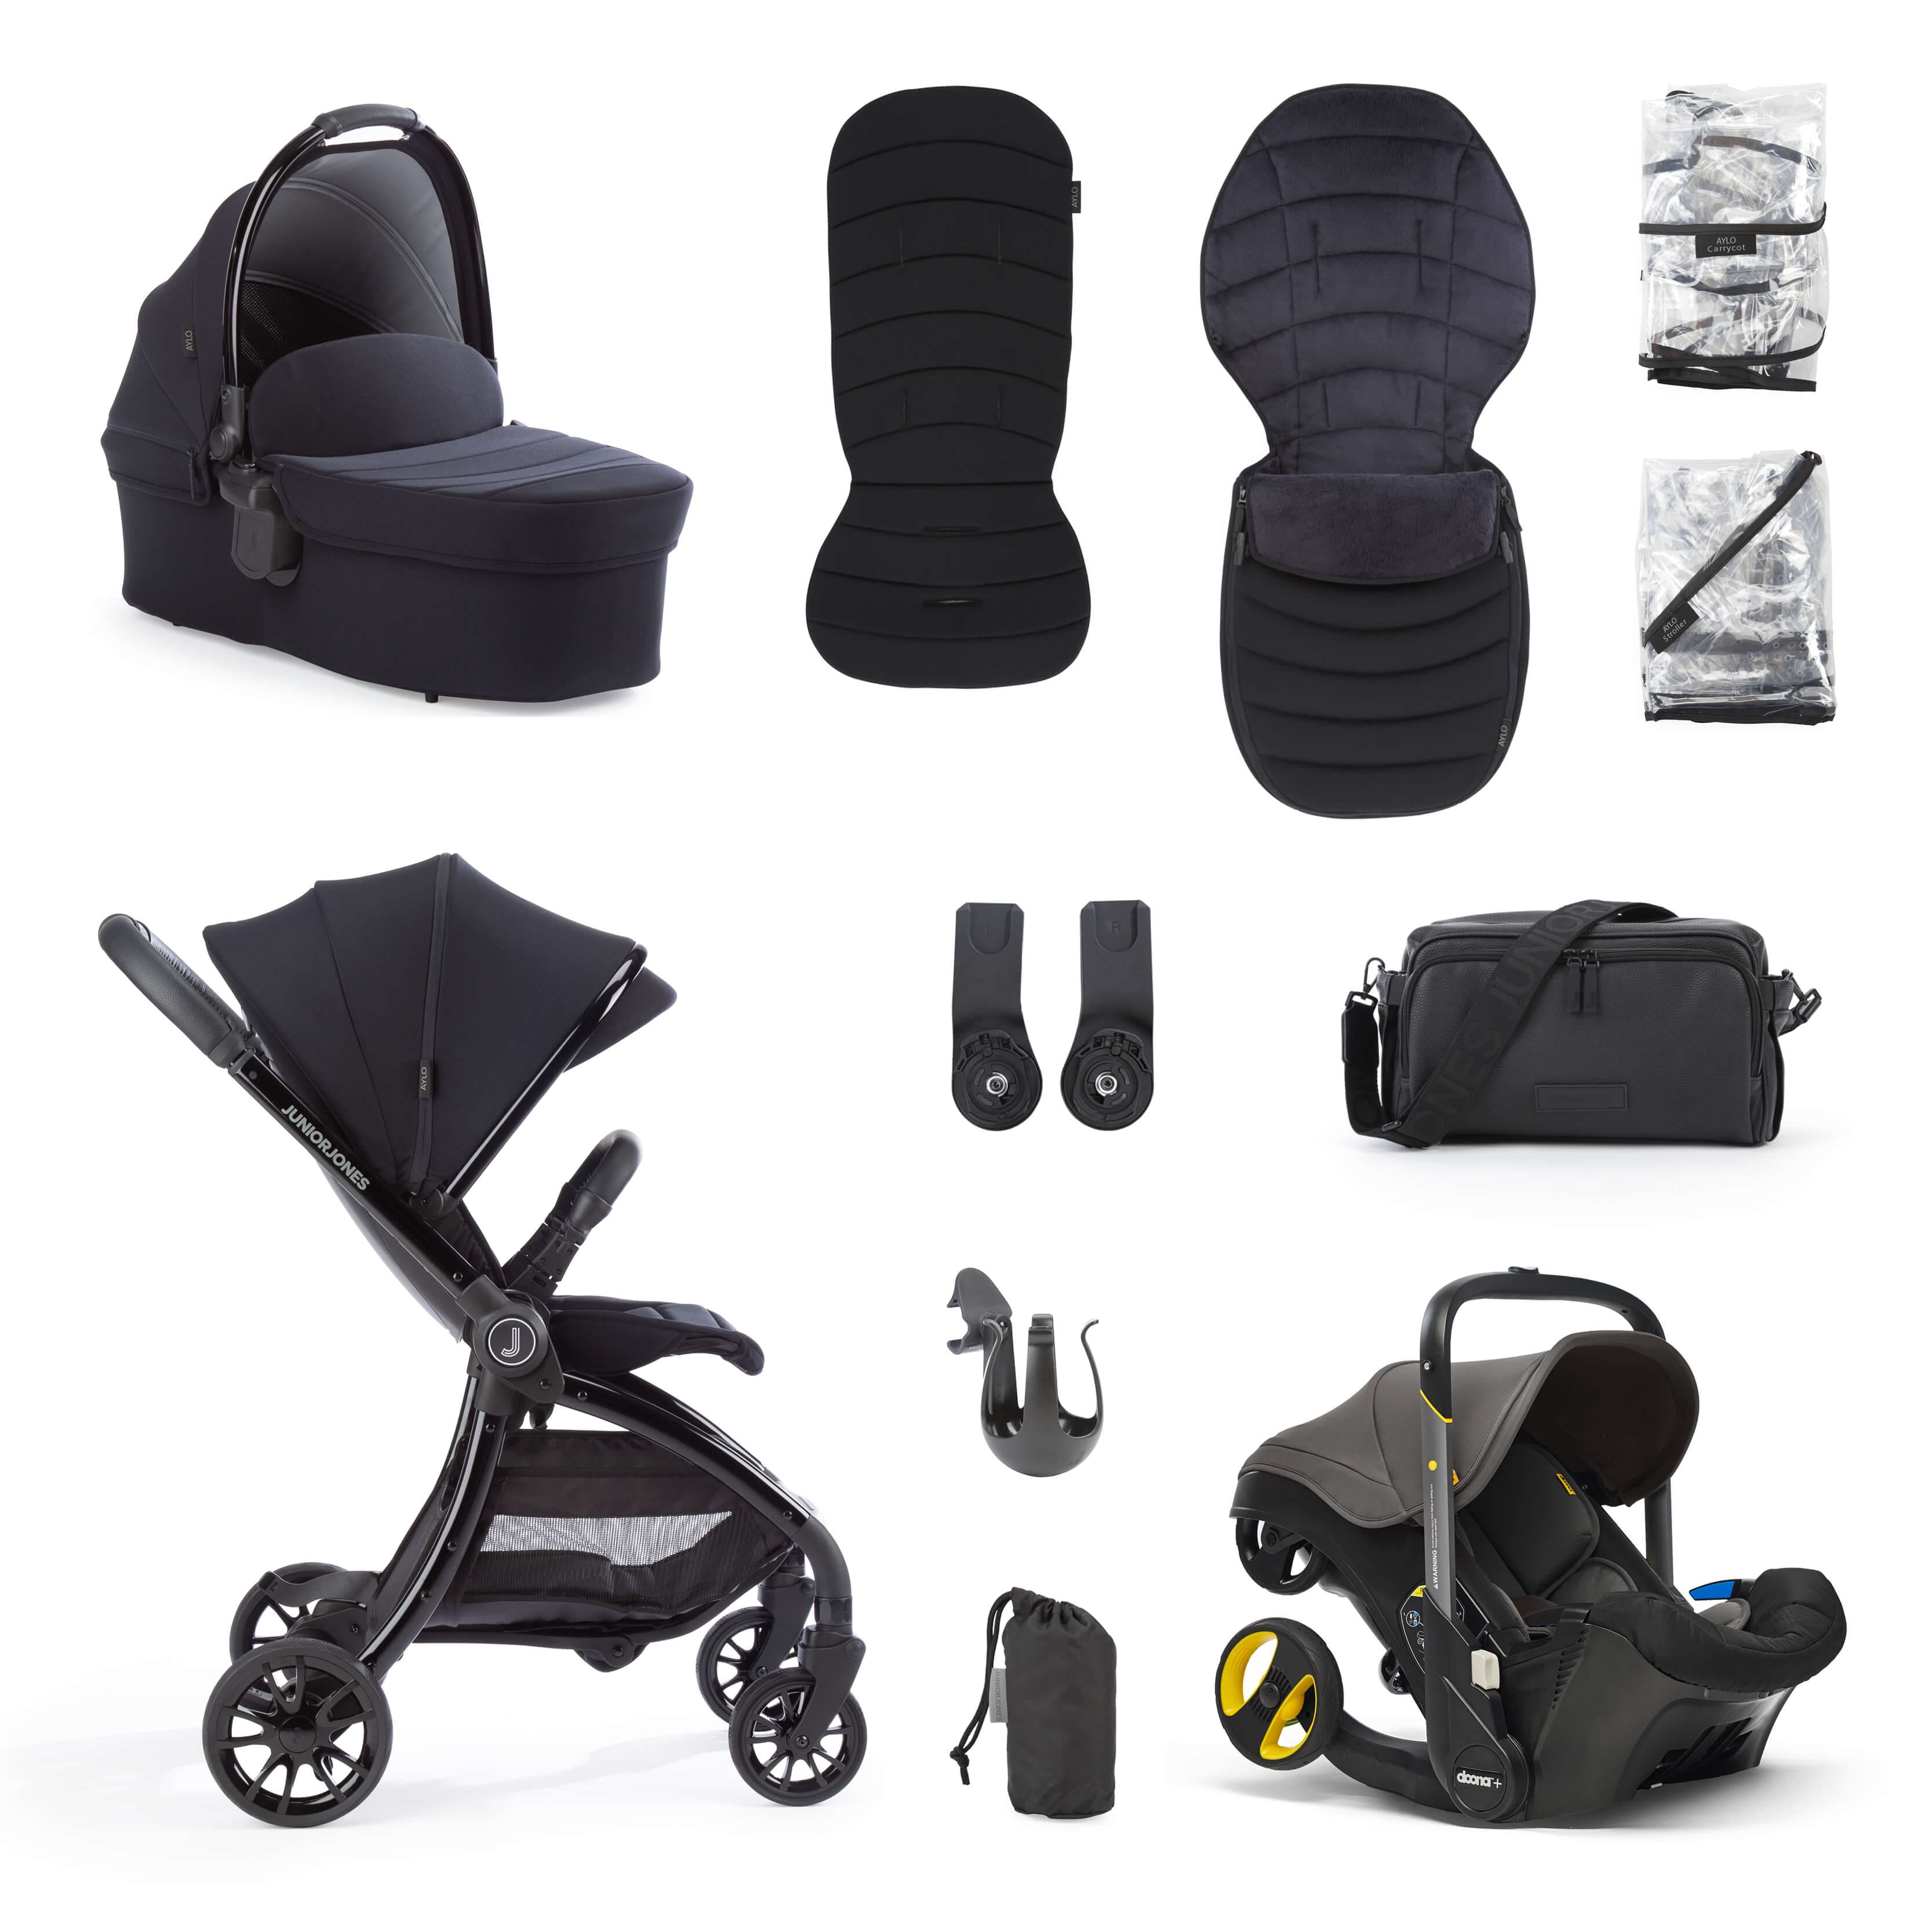 Junior Jones Aylo Rich Black 11pc Travel System inc Doona Urban Grey Car Seat - For Your Little One